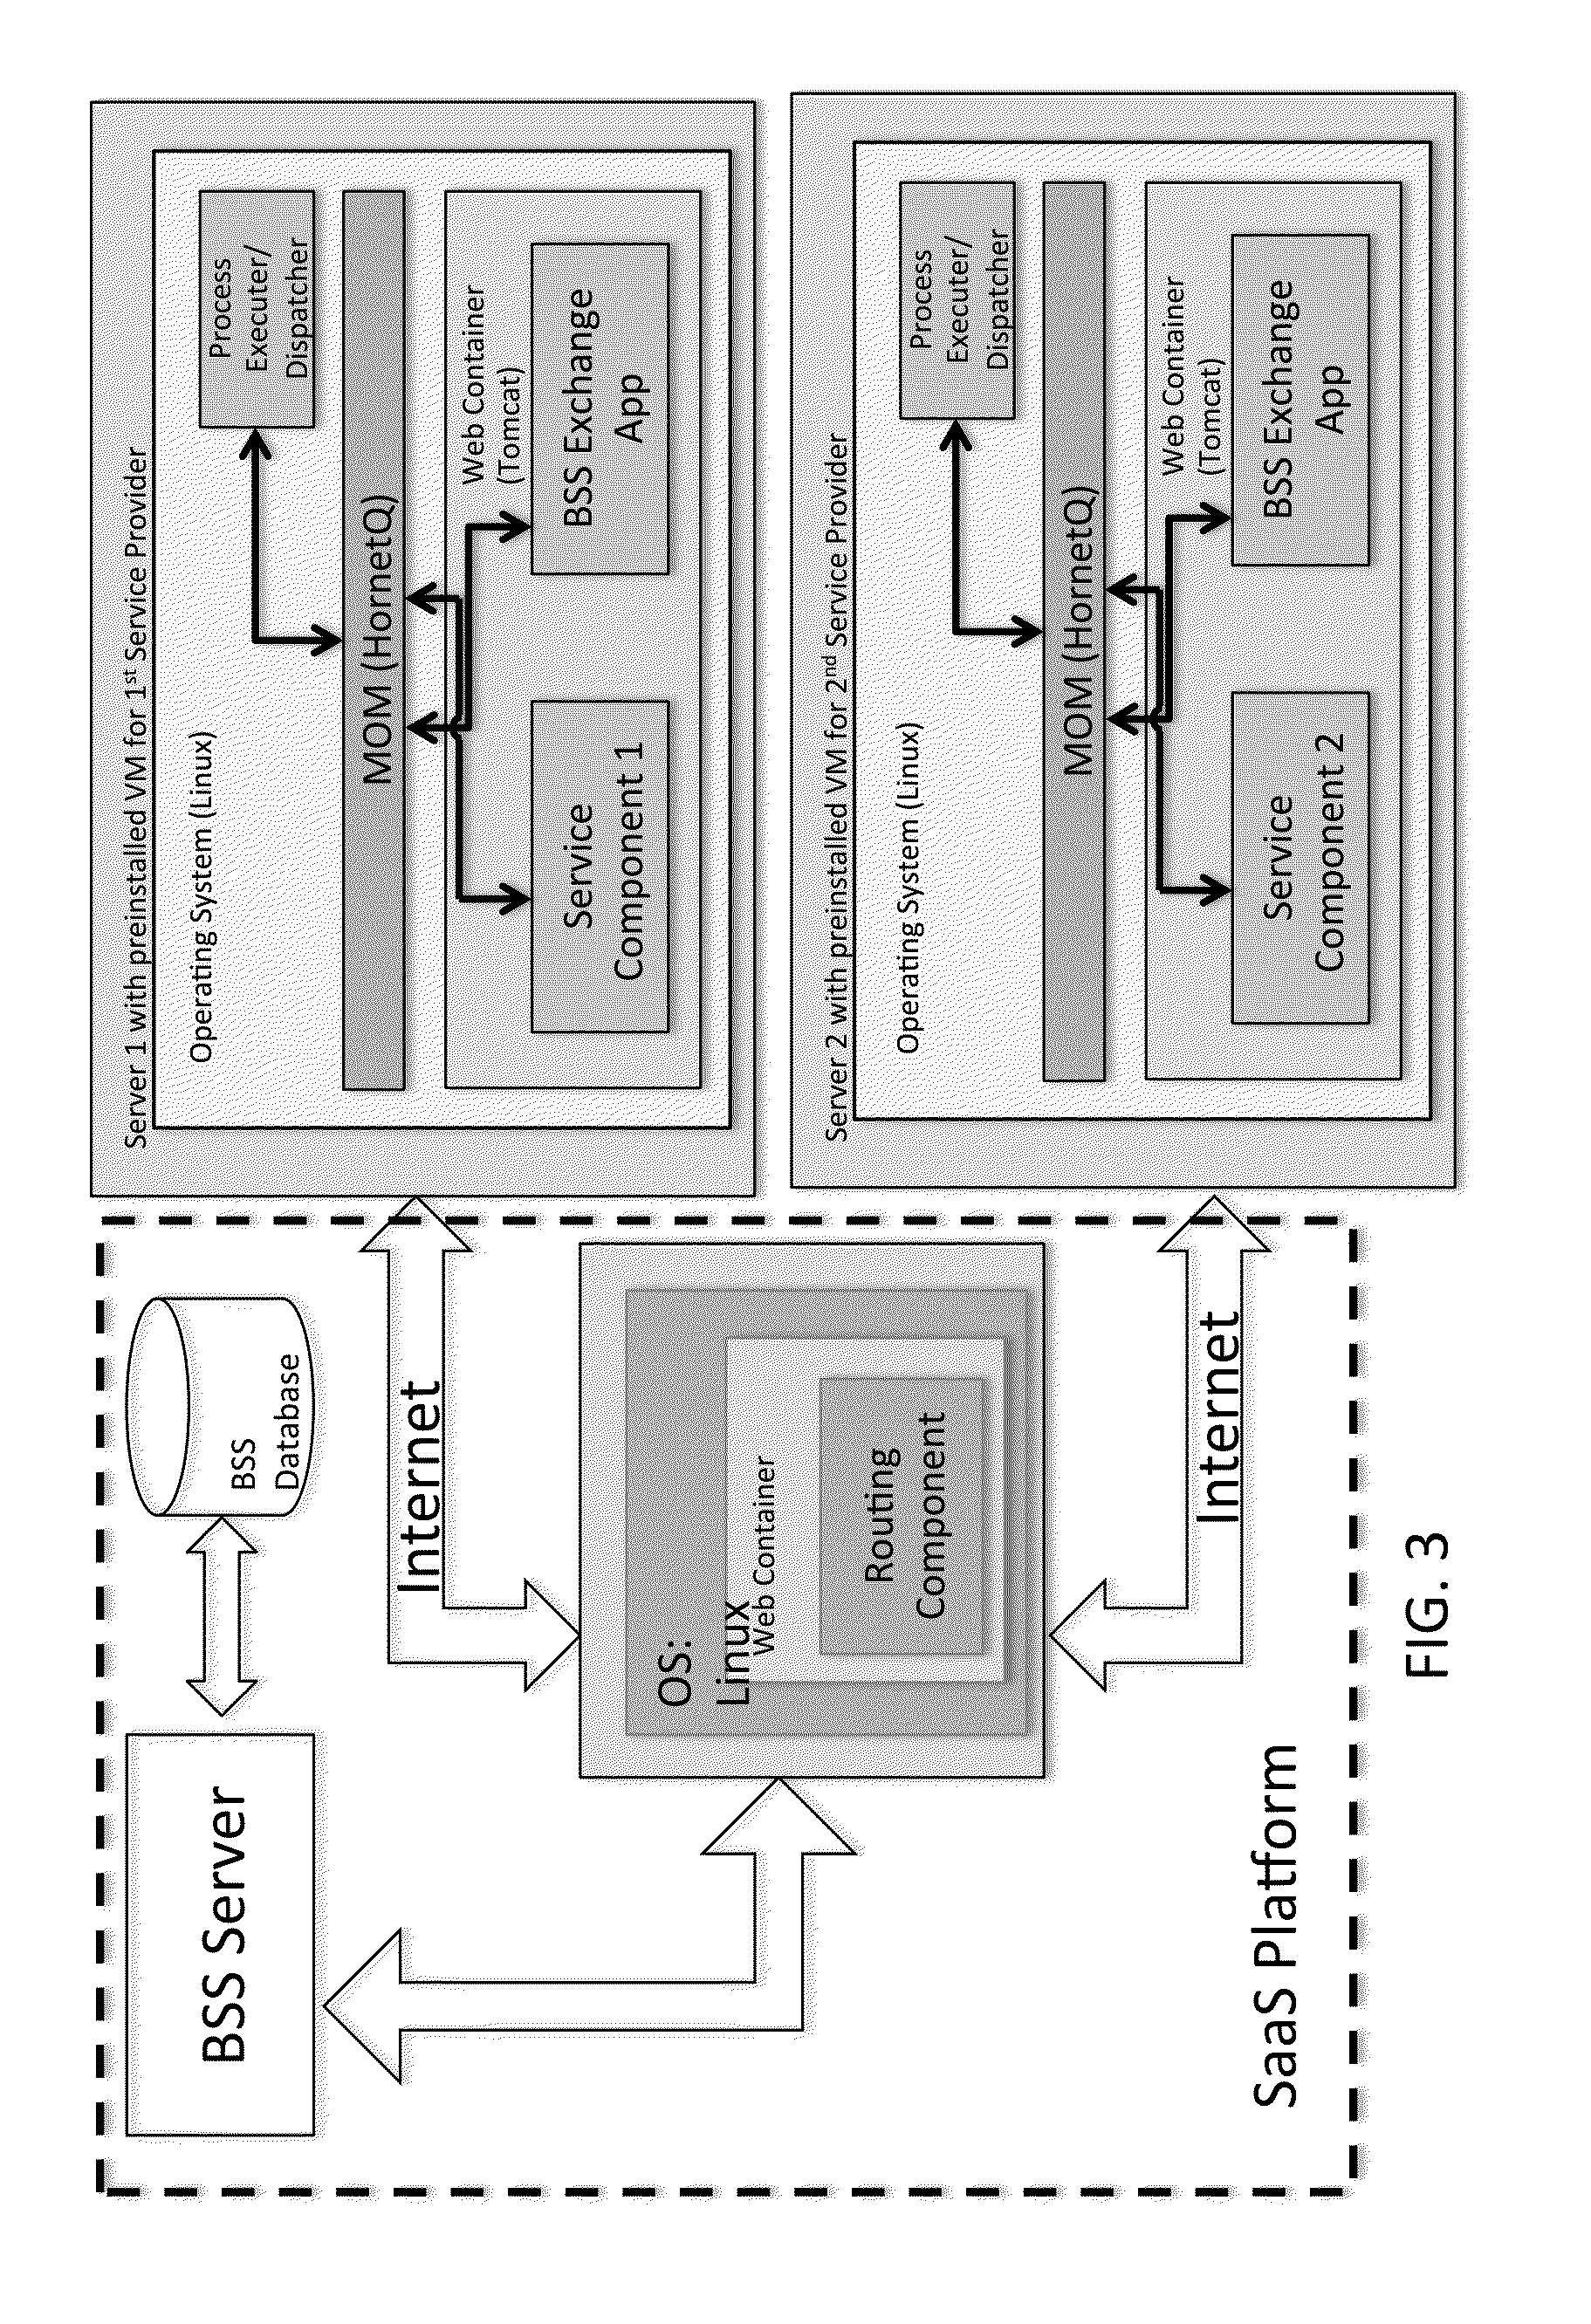 System and method for transporting a document between a first service provider and a second service provider